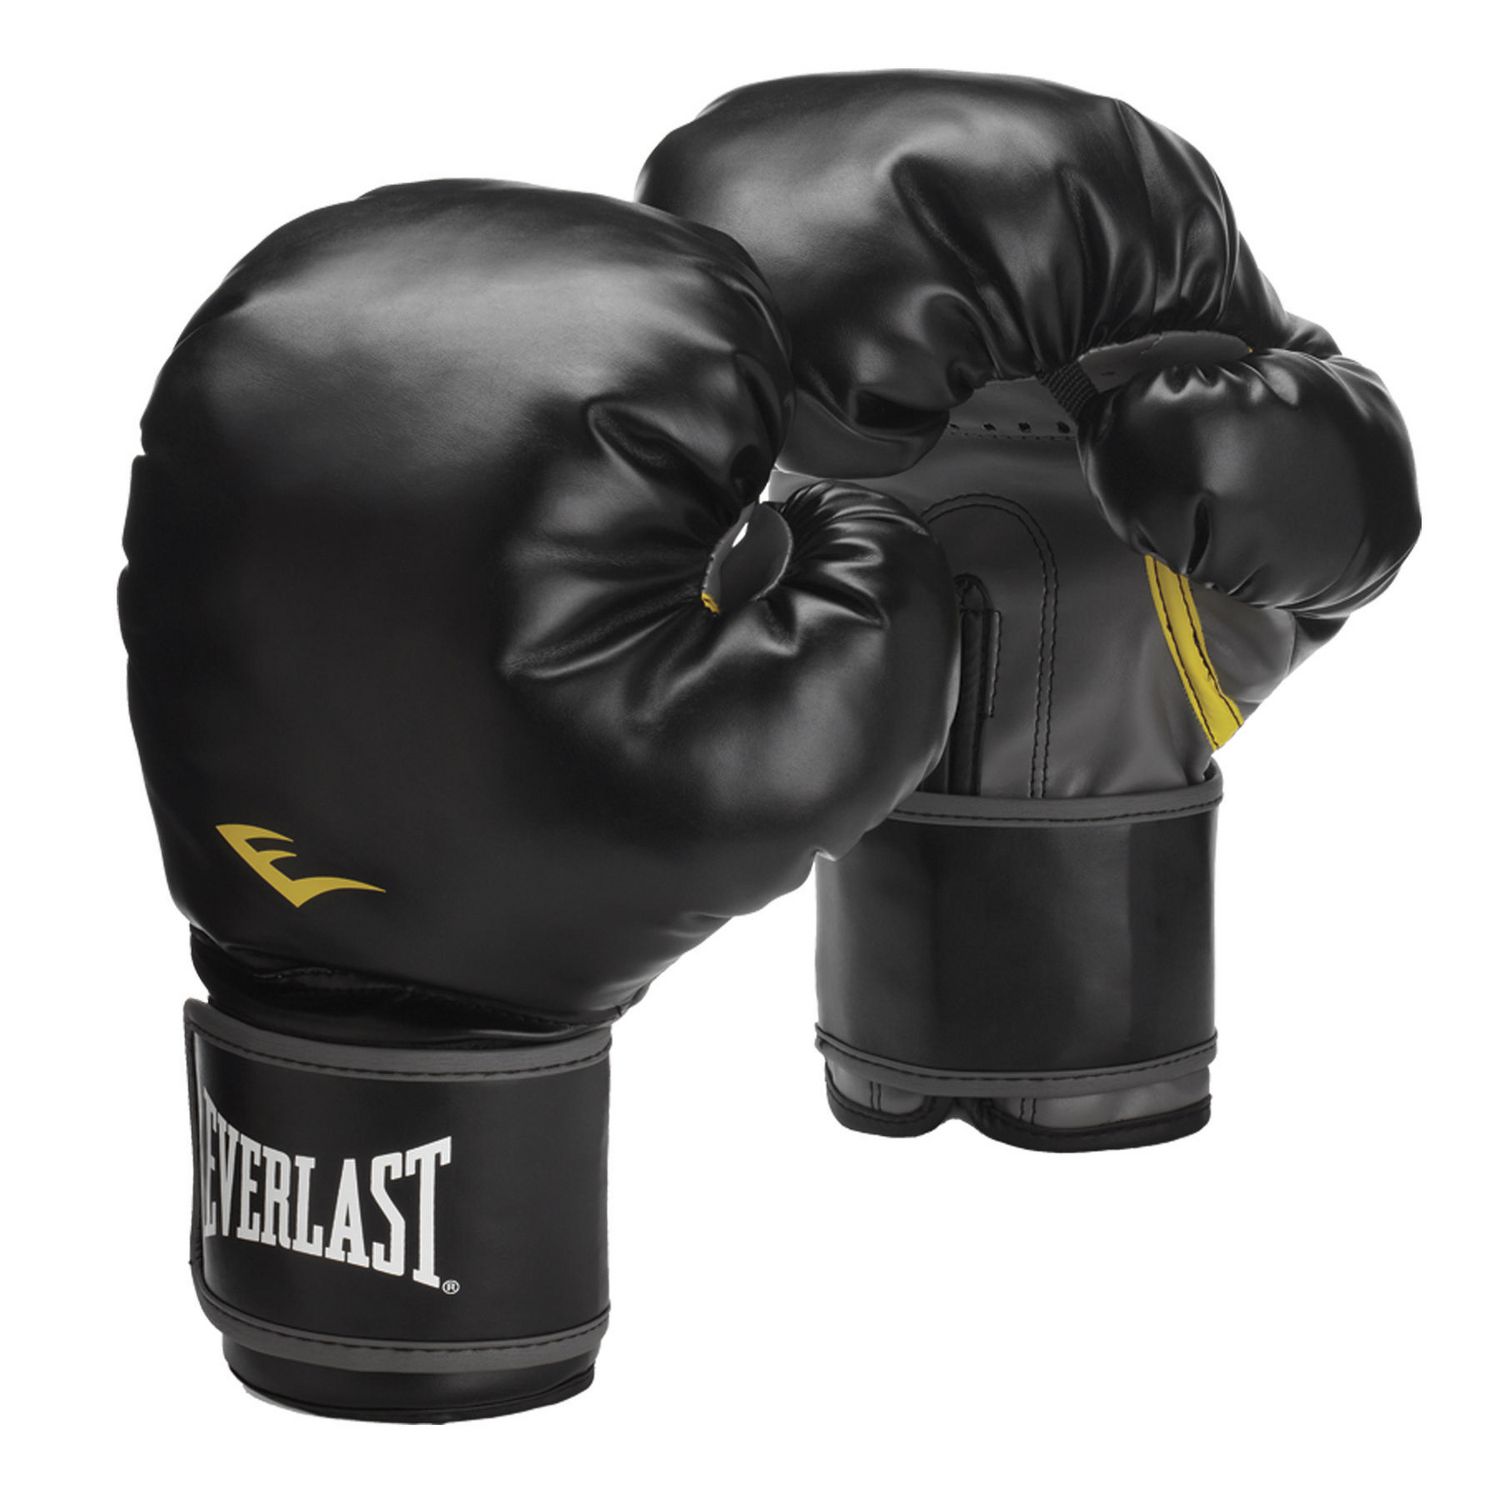 Everlast Boxing Bag Gloves | The Art of Mike Mignola